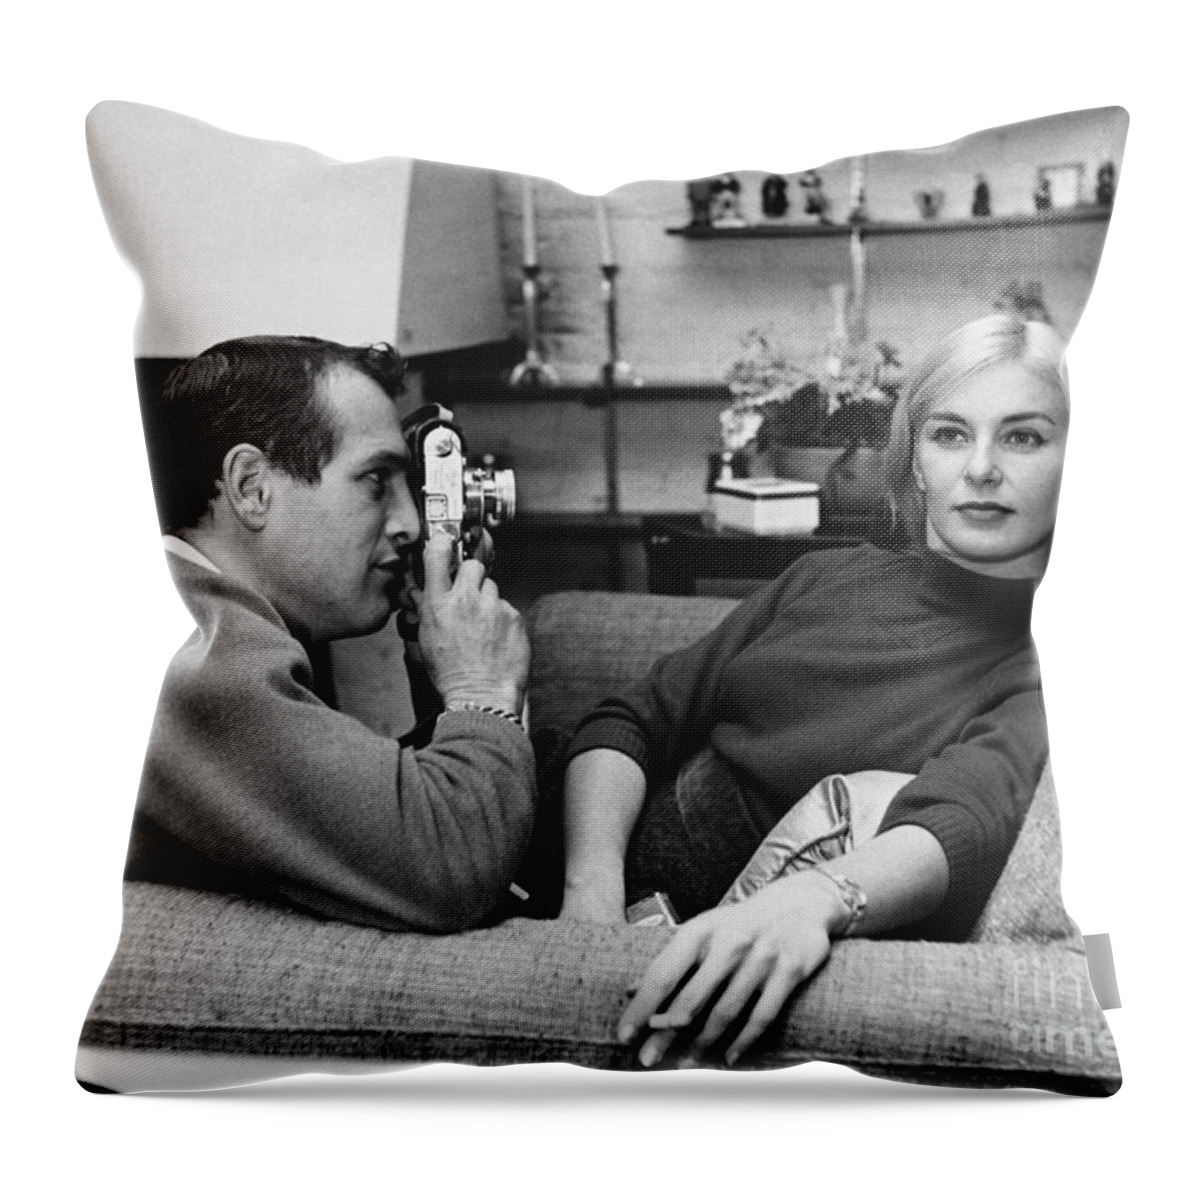 Actress Throw Pillow featuring the photograph Paul Newman and Joanne Woodward by Louis Goldman